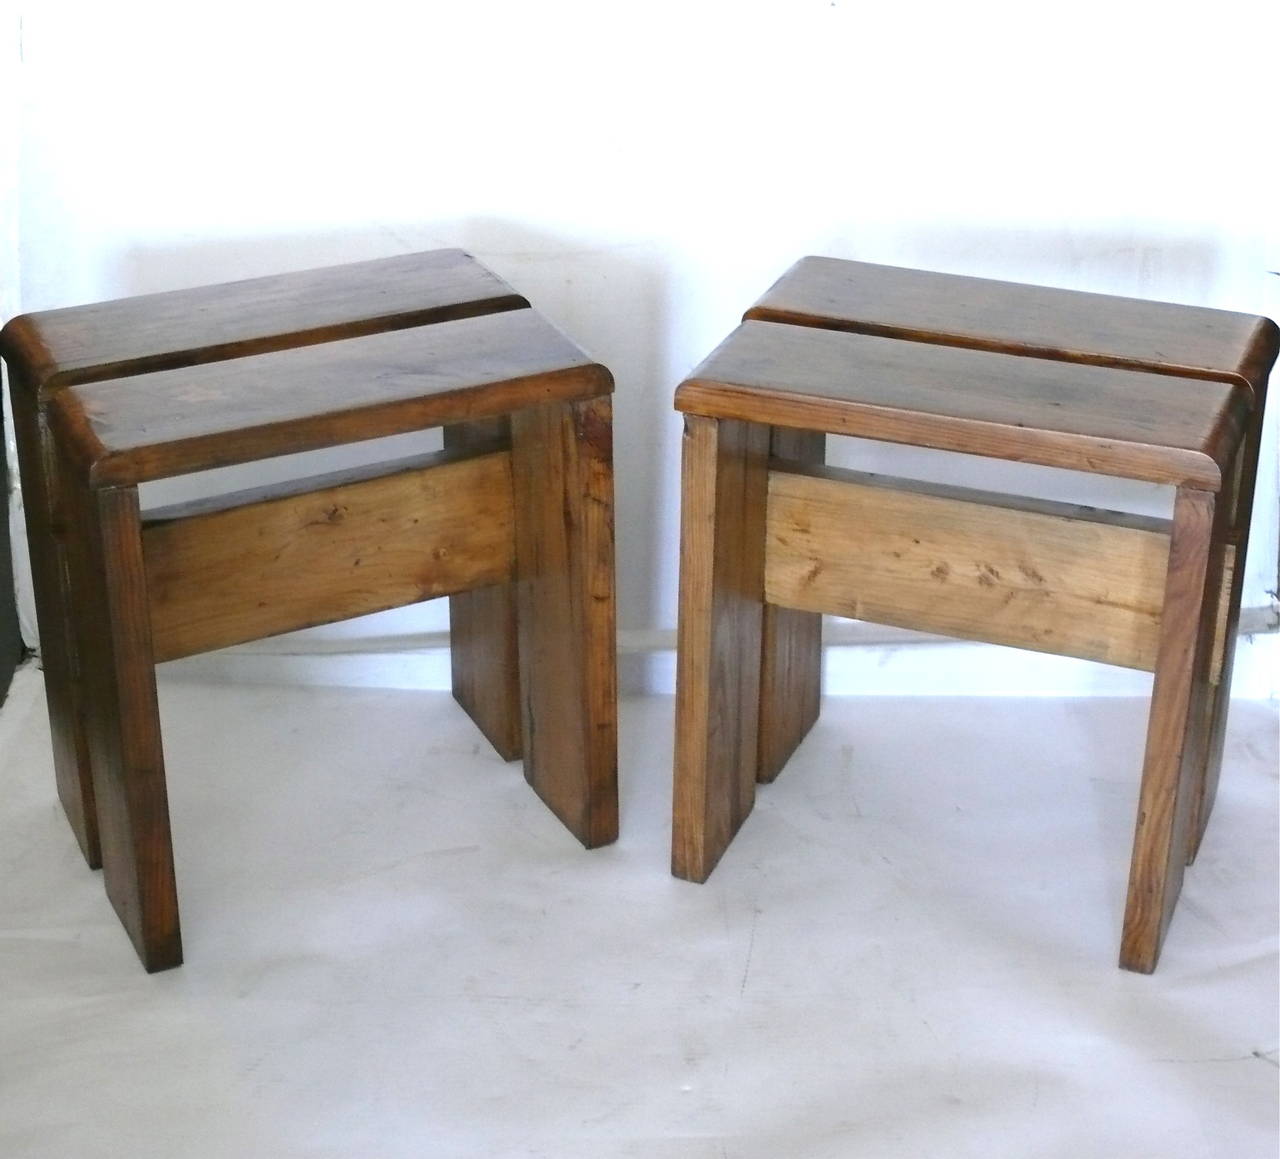 Fantastic pair of Les Arcs stools by Charlotte Perriand. Originally from the Les Arcs ski resort. French oak has great patina and wear.